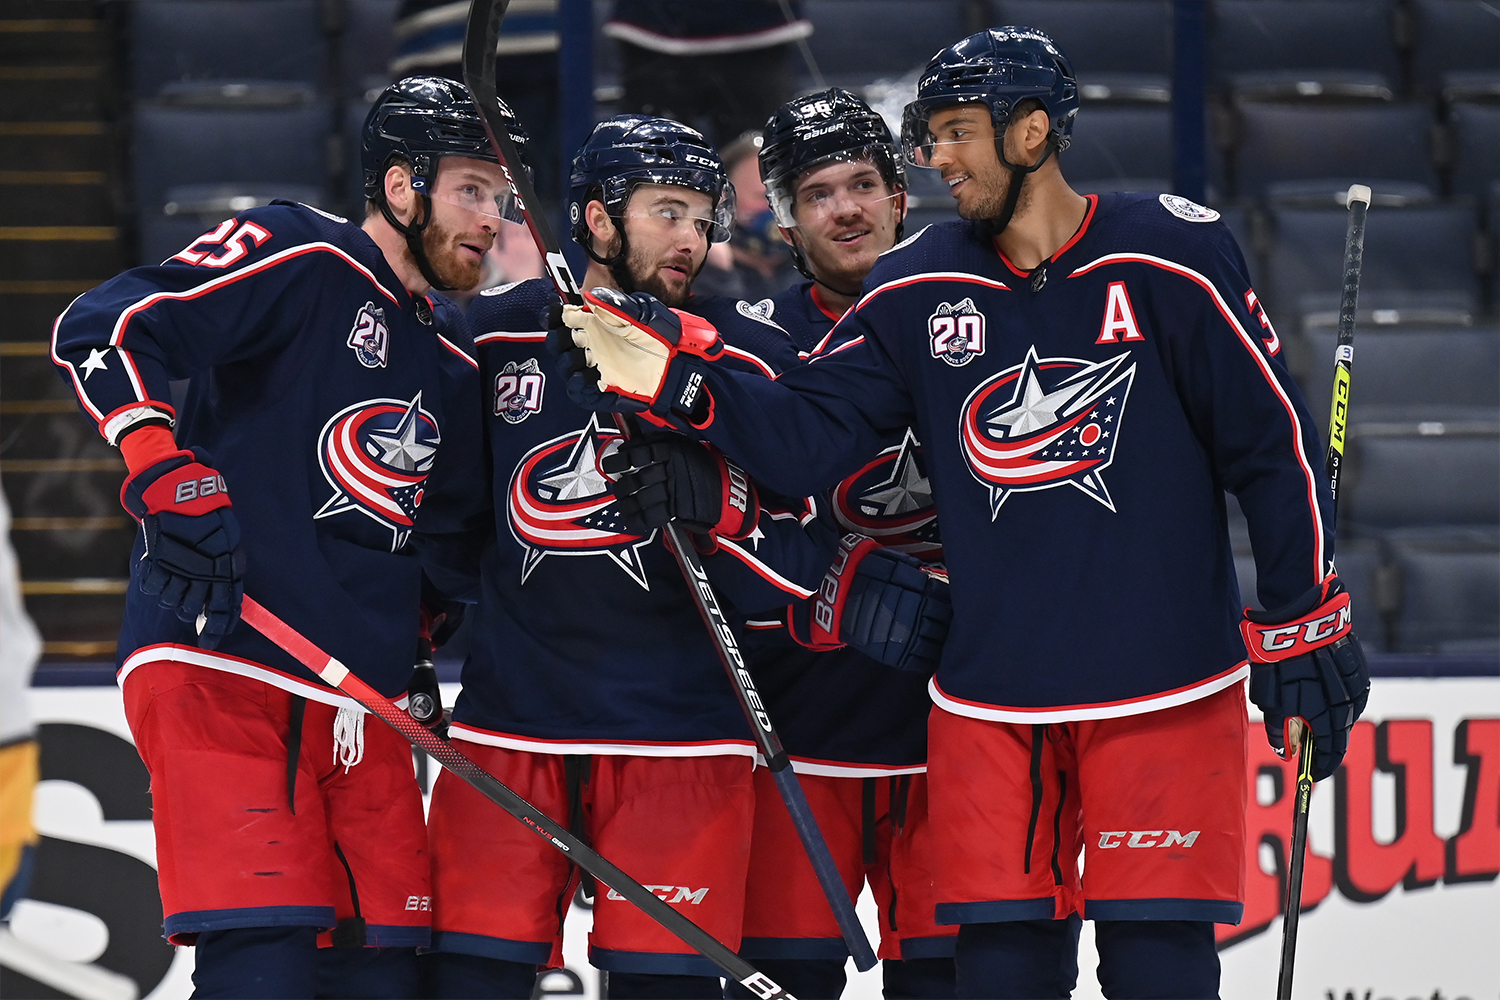 Mikhail Grigorenko #25, far left, Emil Bemstrom #52, Jack Roslovic #96 and Seth Jones #3, all of the Columbus Blue Jackets celebrate Bemstrom's second goal of the third period against the Nashville Predators at Nationwide Arena on May 3, 2021 